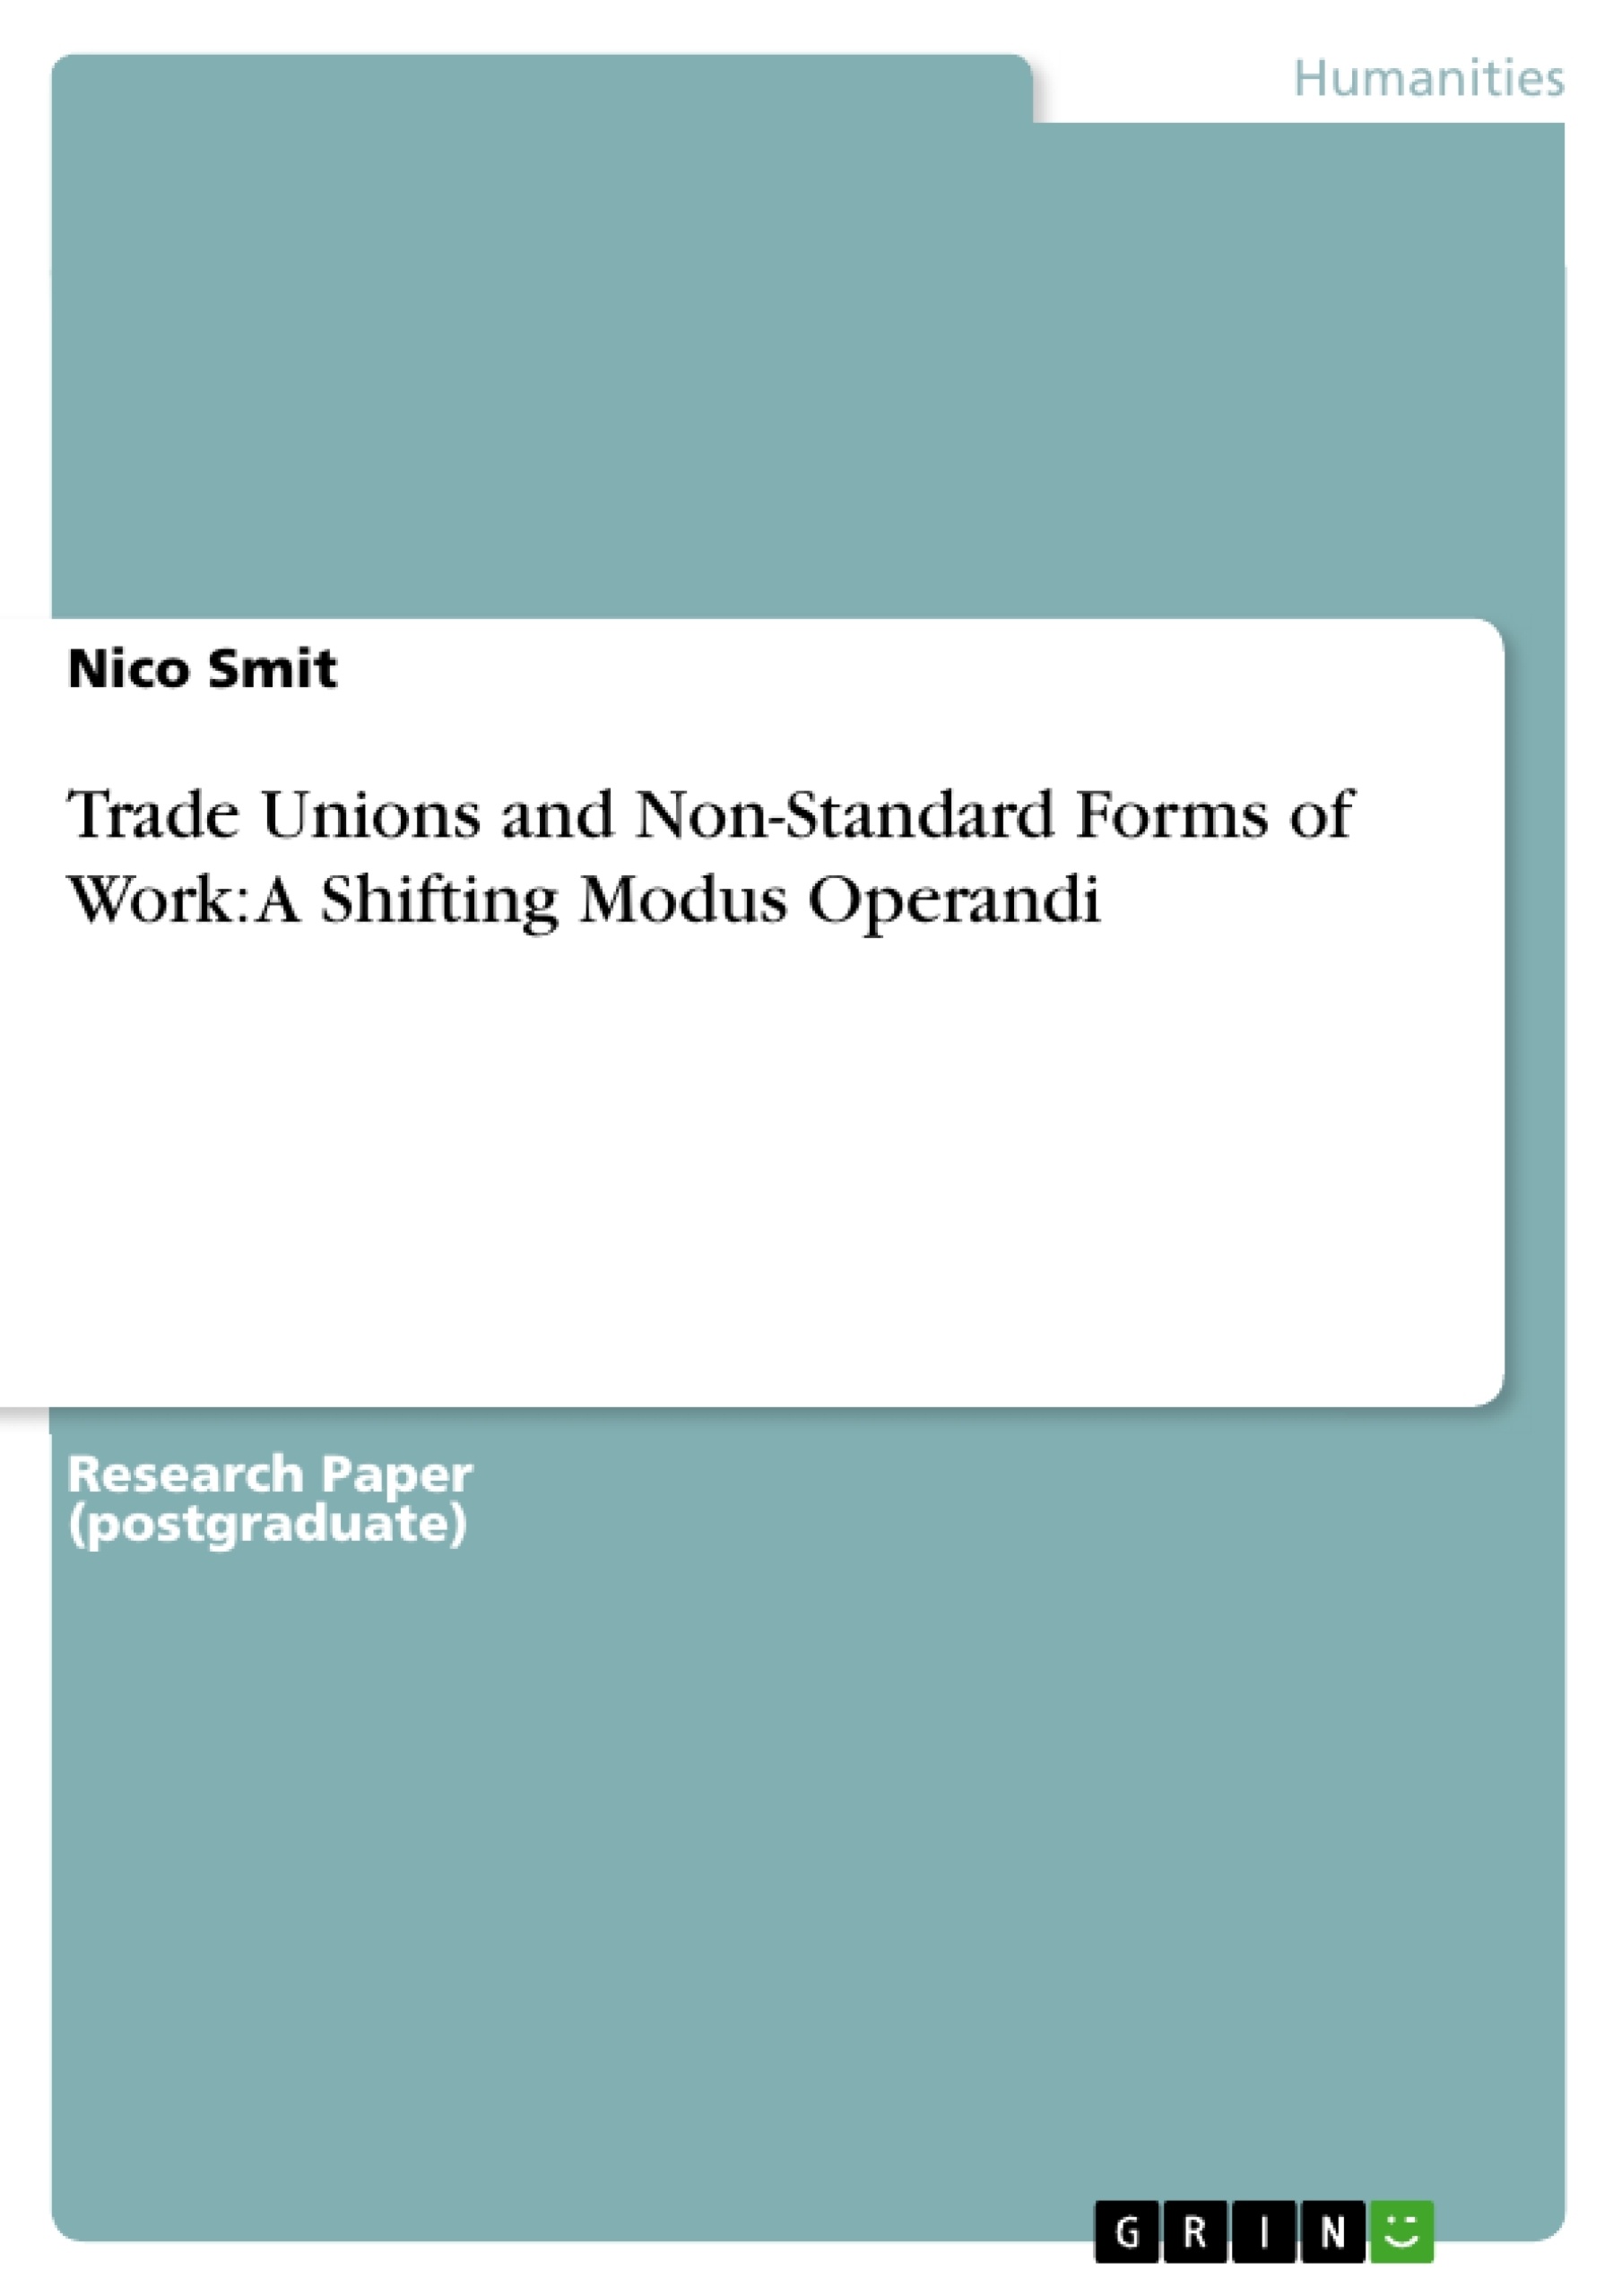 Título: Trade Unions and Non-Standard Forms of Work: A Shifting Modus Operandi